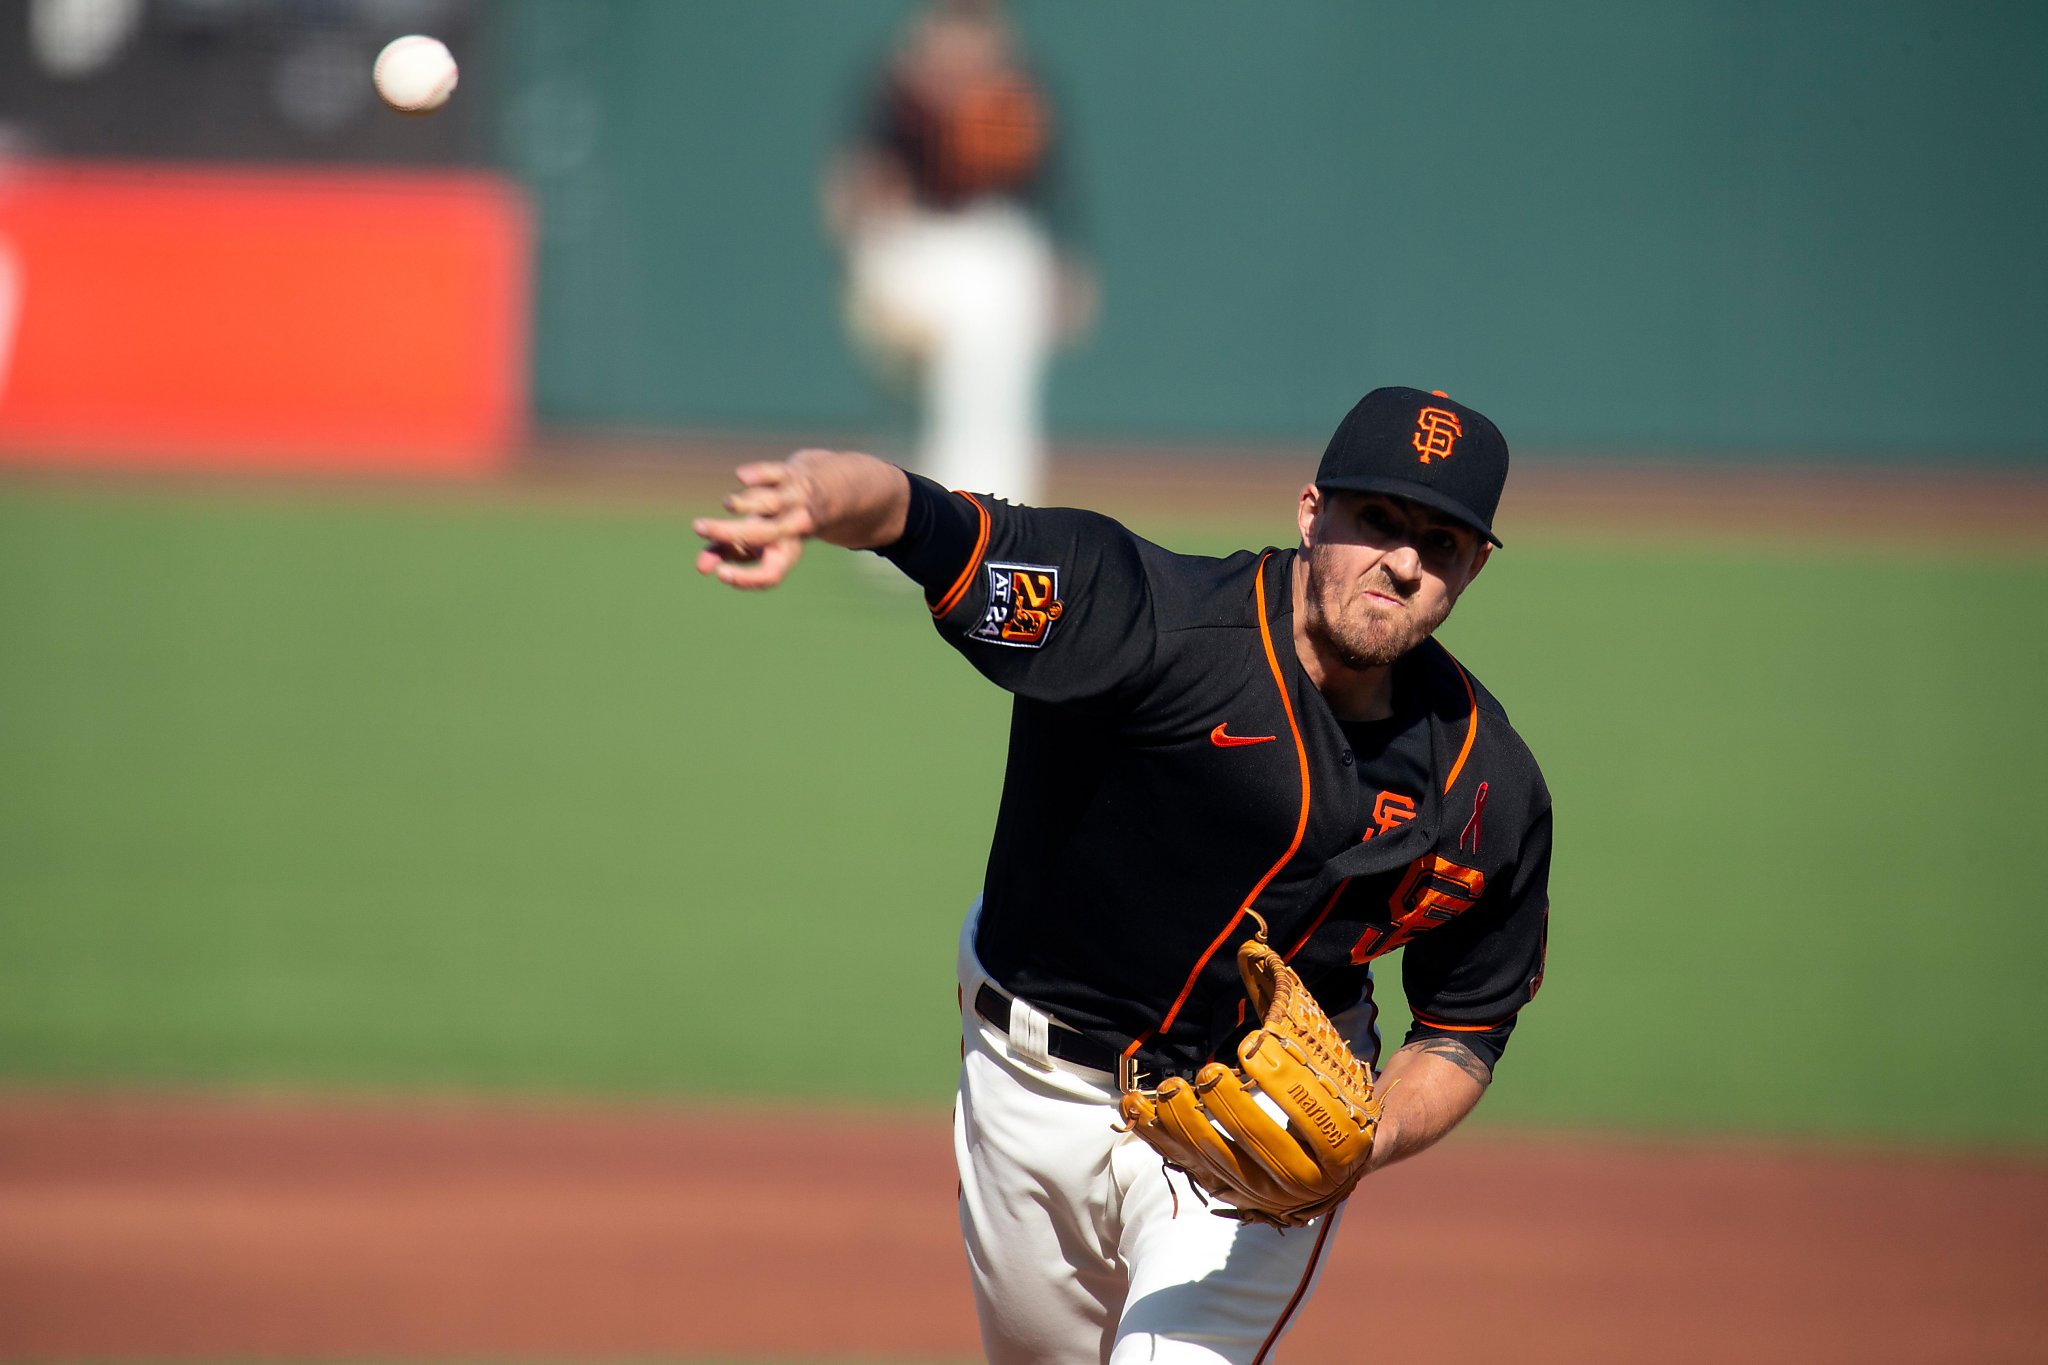 SF Giants shut down by Clayton Kershaw in 7-0 loss to Dodgers